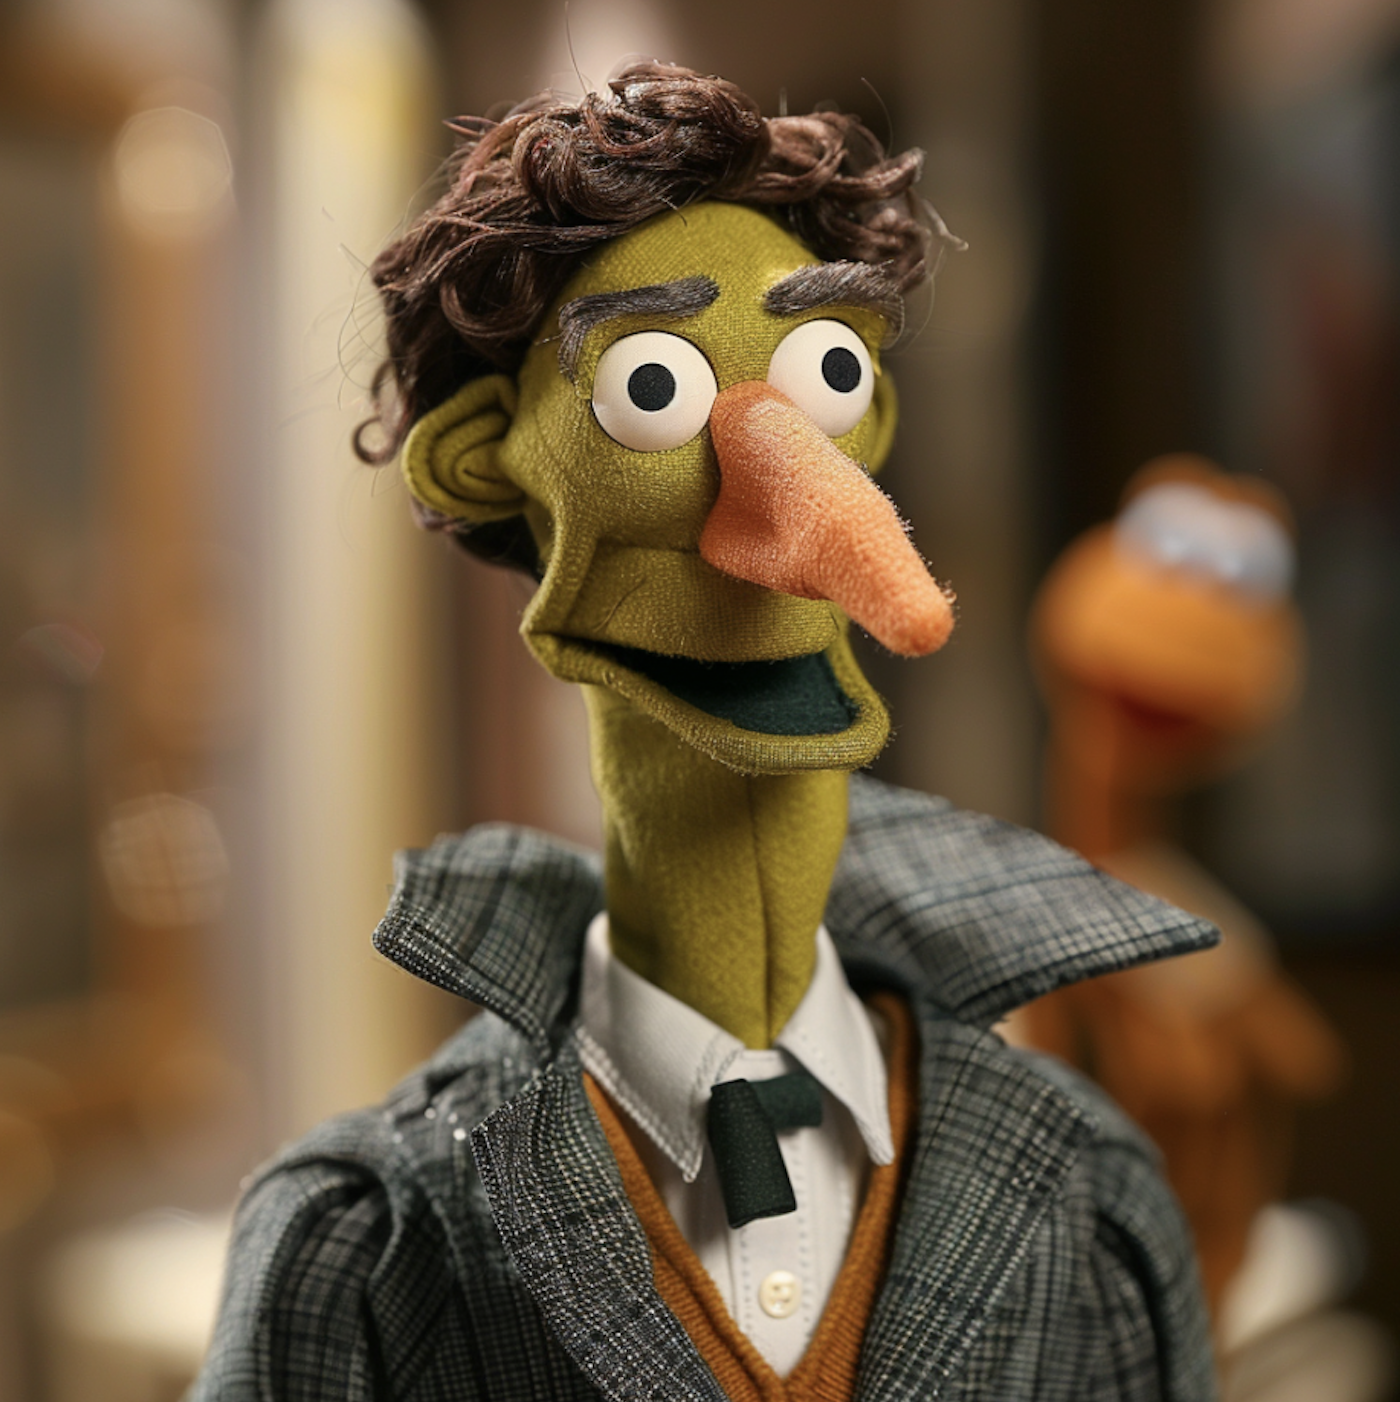 Muppet in a tweed suit and tie, dark hair, and long nose